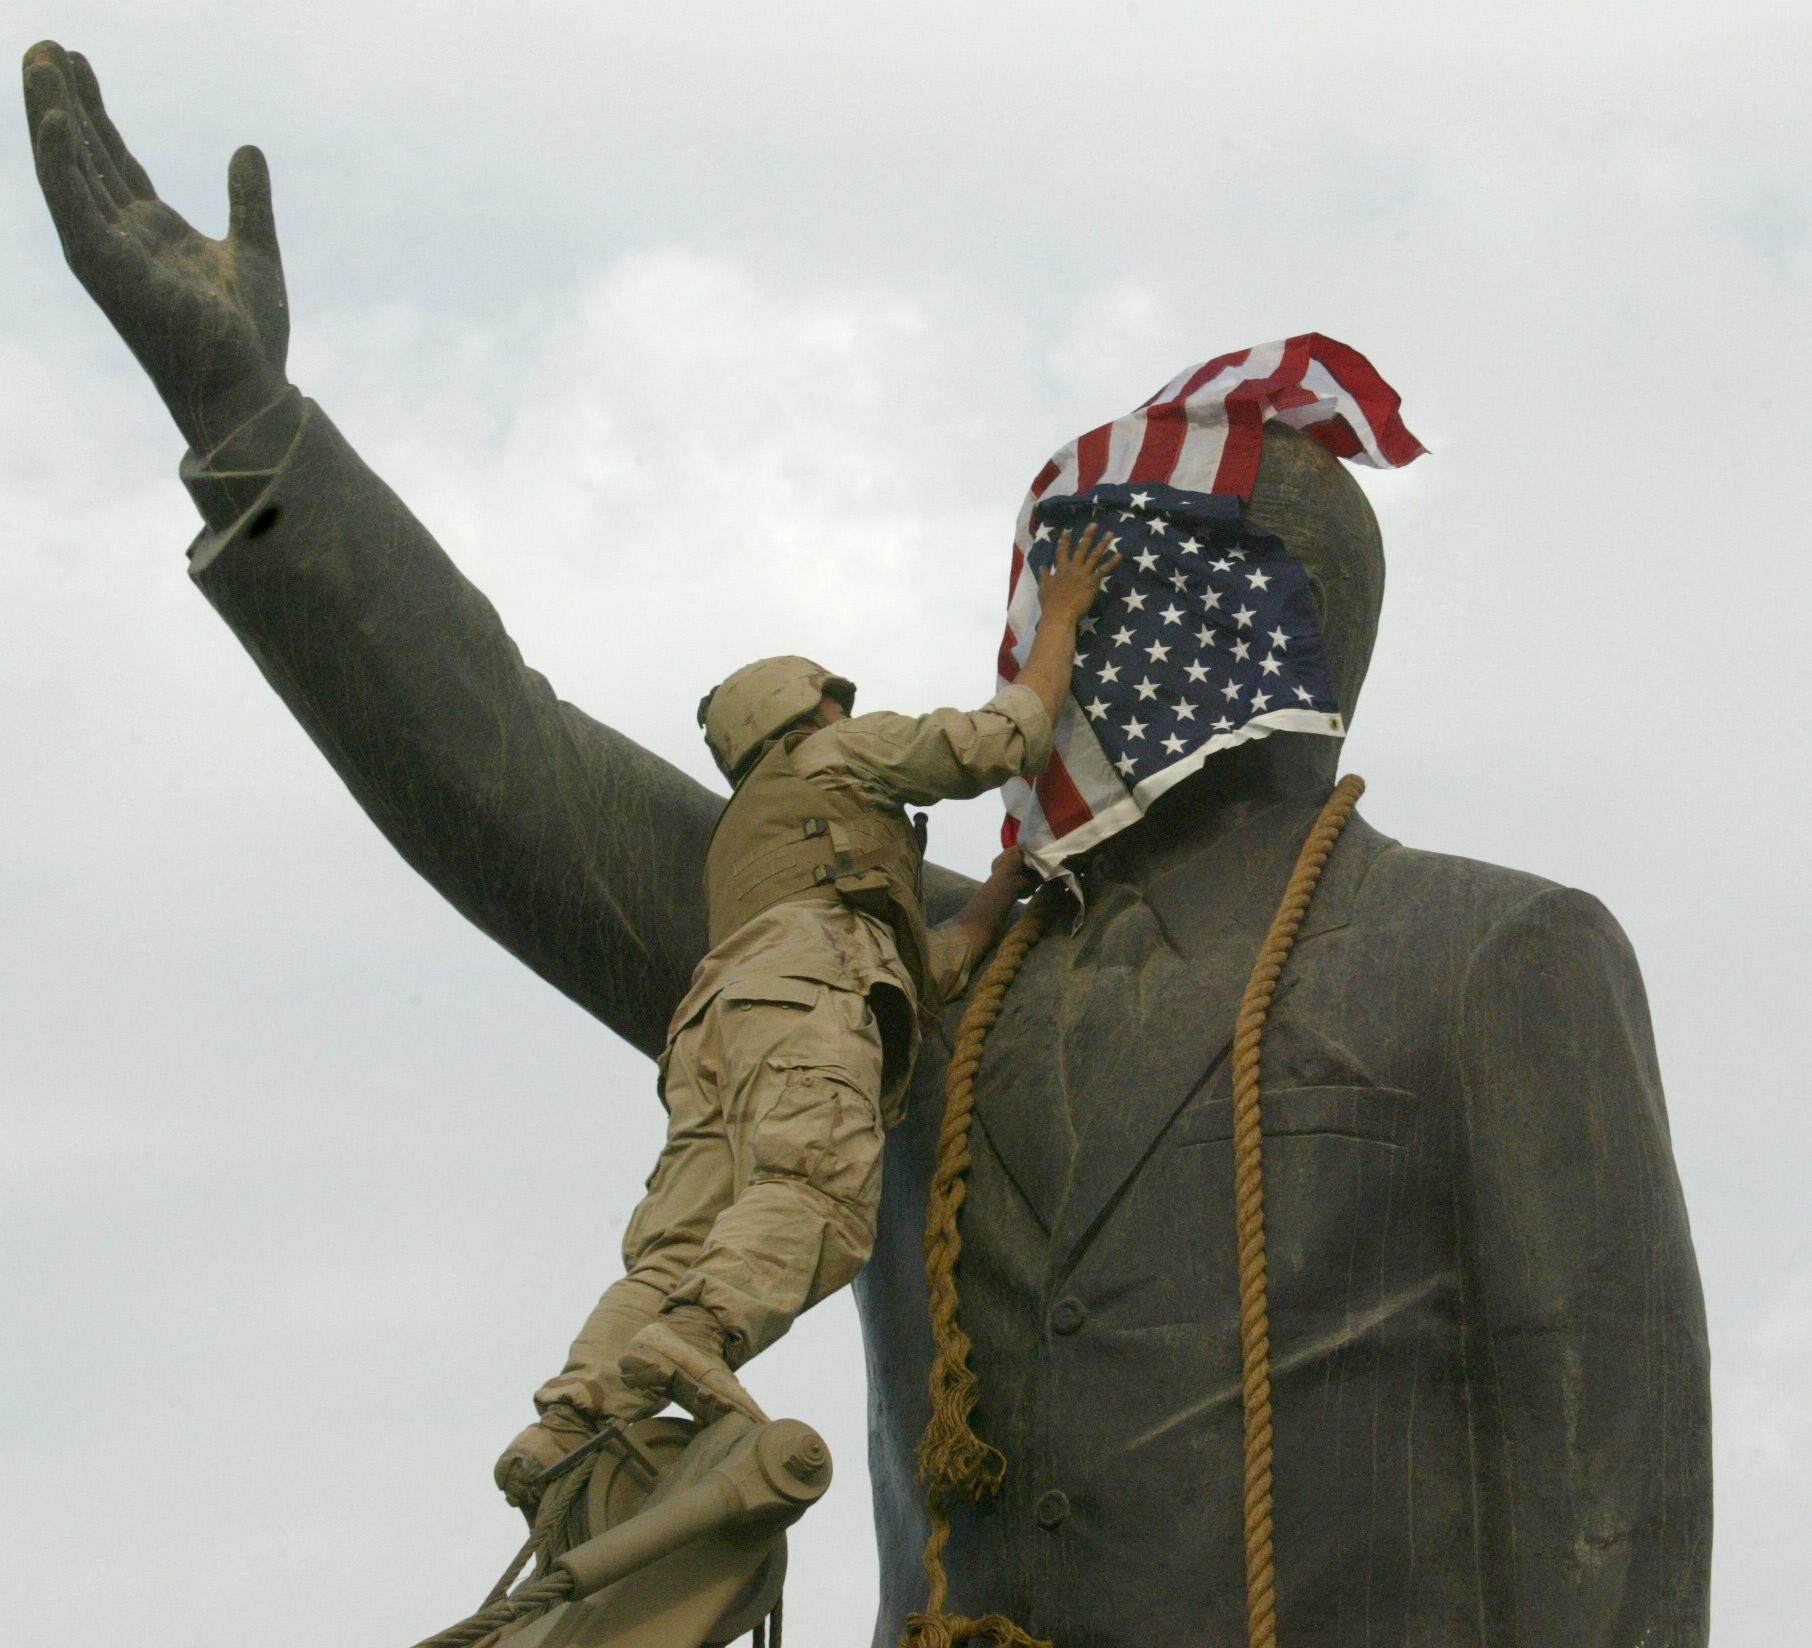 A US Marine covers the face of Saddam Hussein’s statue with the US flag in Baghdad’s al-Fardous square on April 9, 2003. File photo: AFP